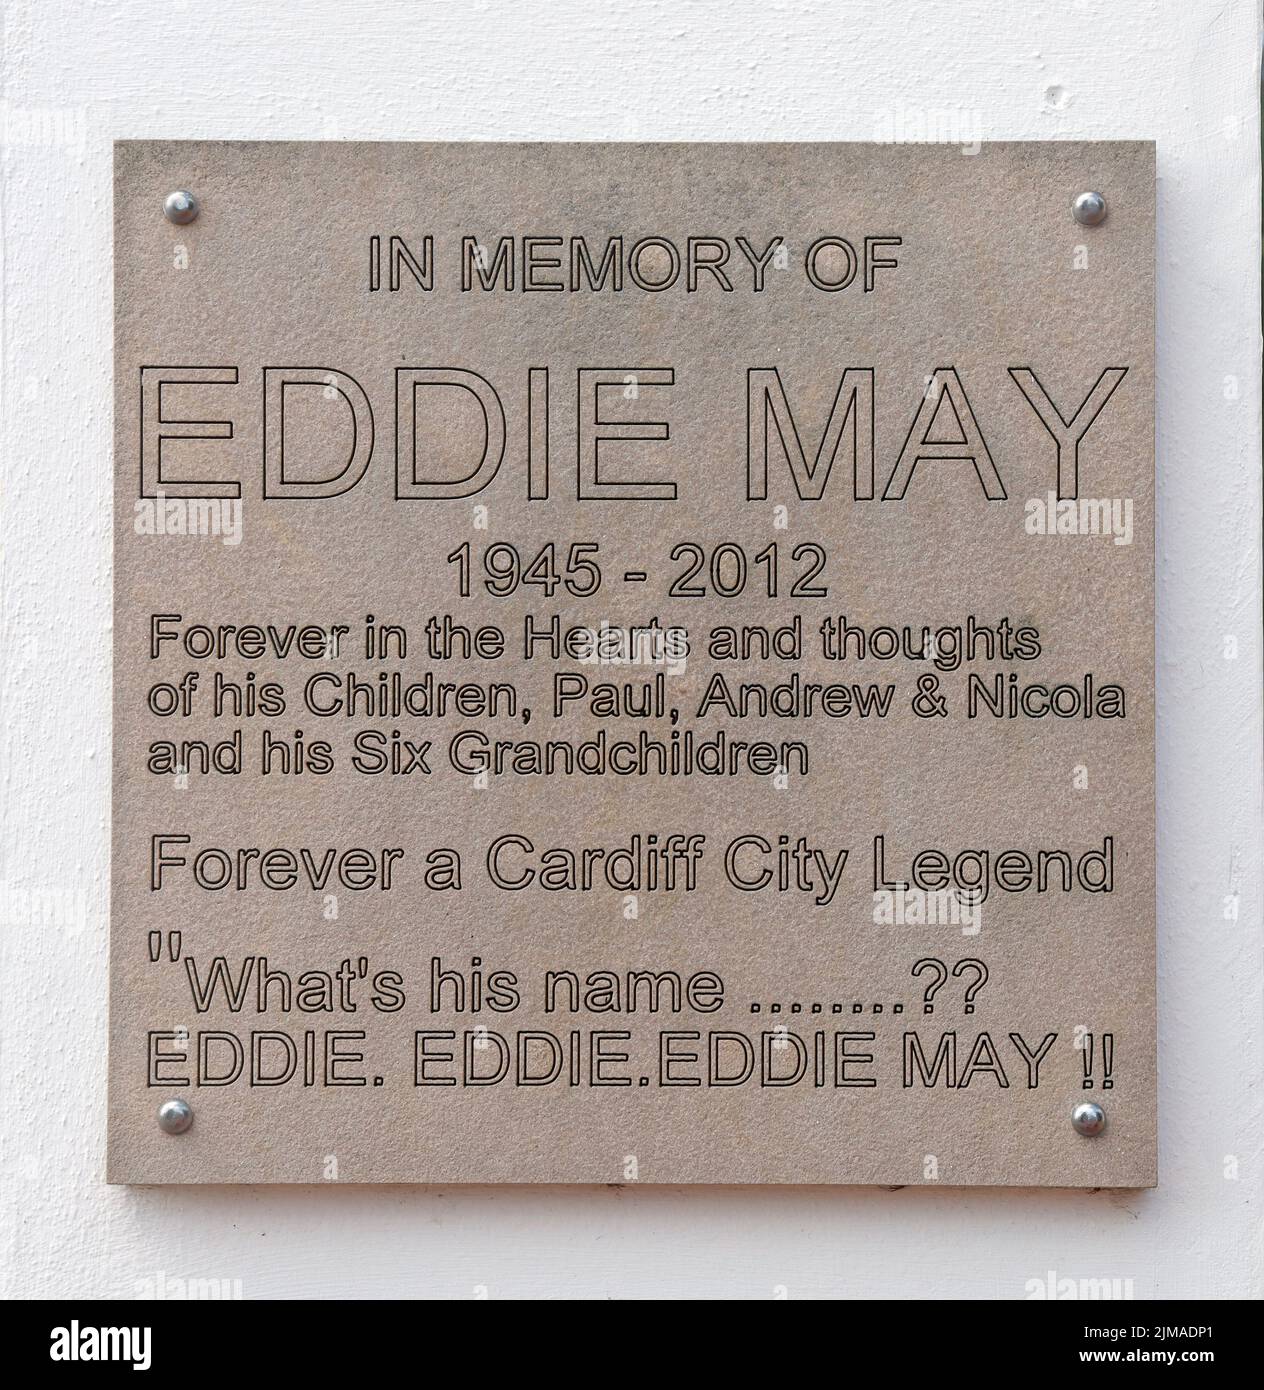 Memorial to Eddie May at Cardiff FC entrance, Sloper |R|oad Stock Photo